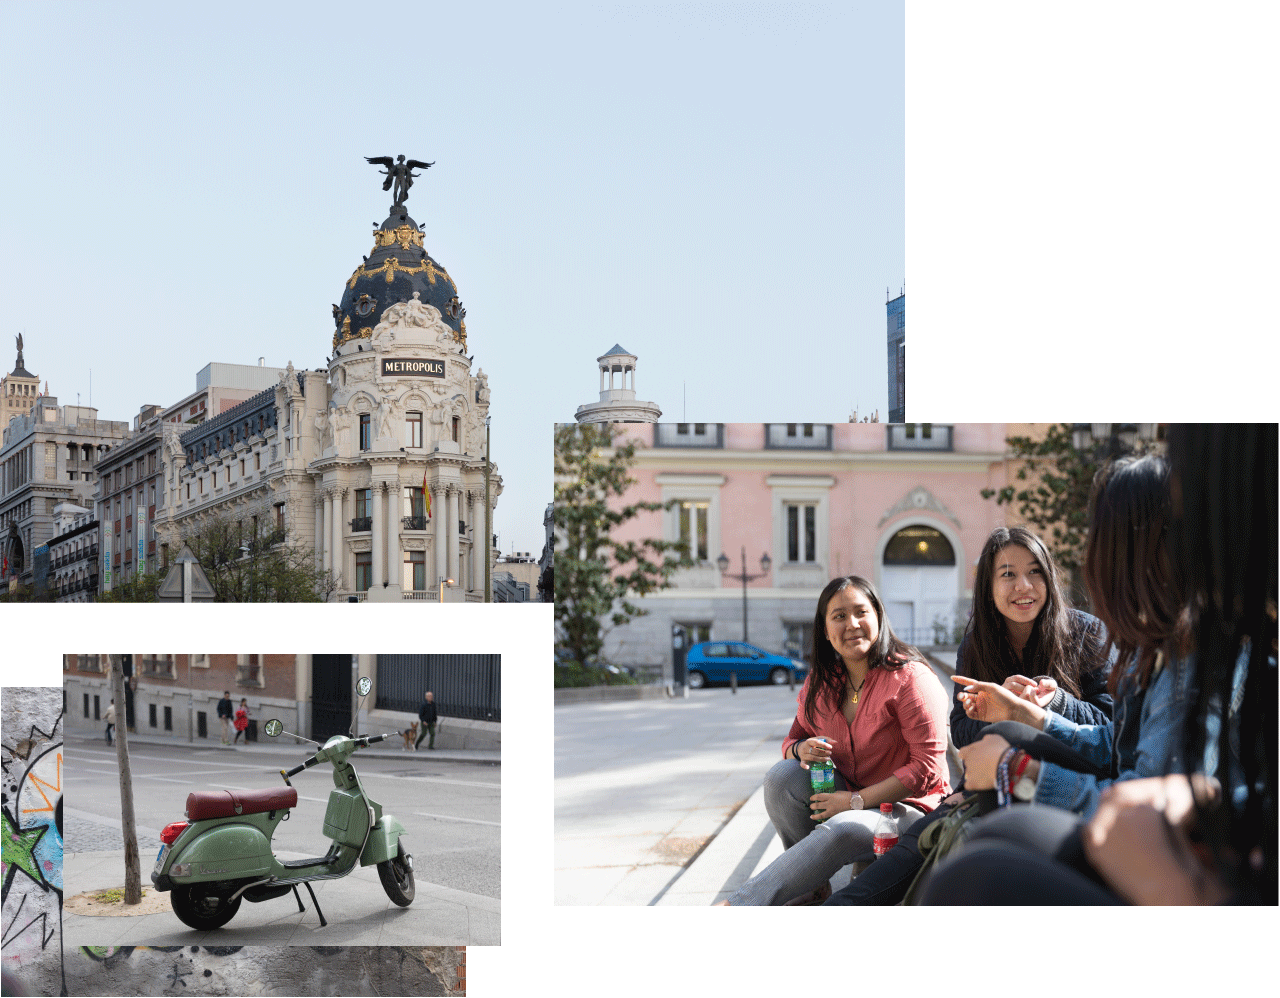 A collage of Madrid (clockwise from top): old architecture in Madrid, students hanging out outside, and a green vespa parked on the street.